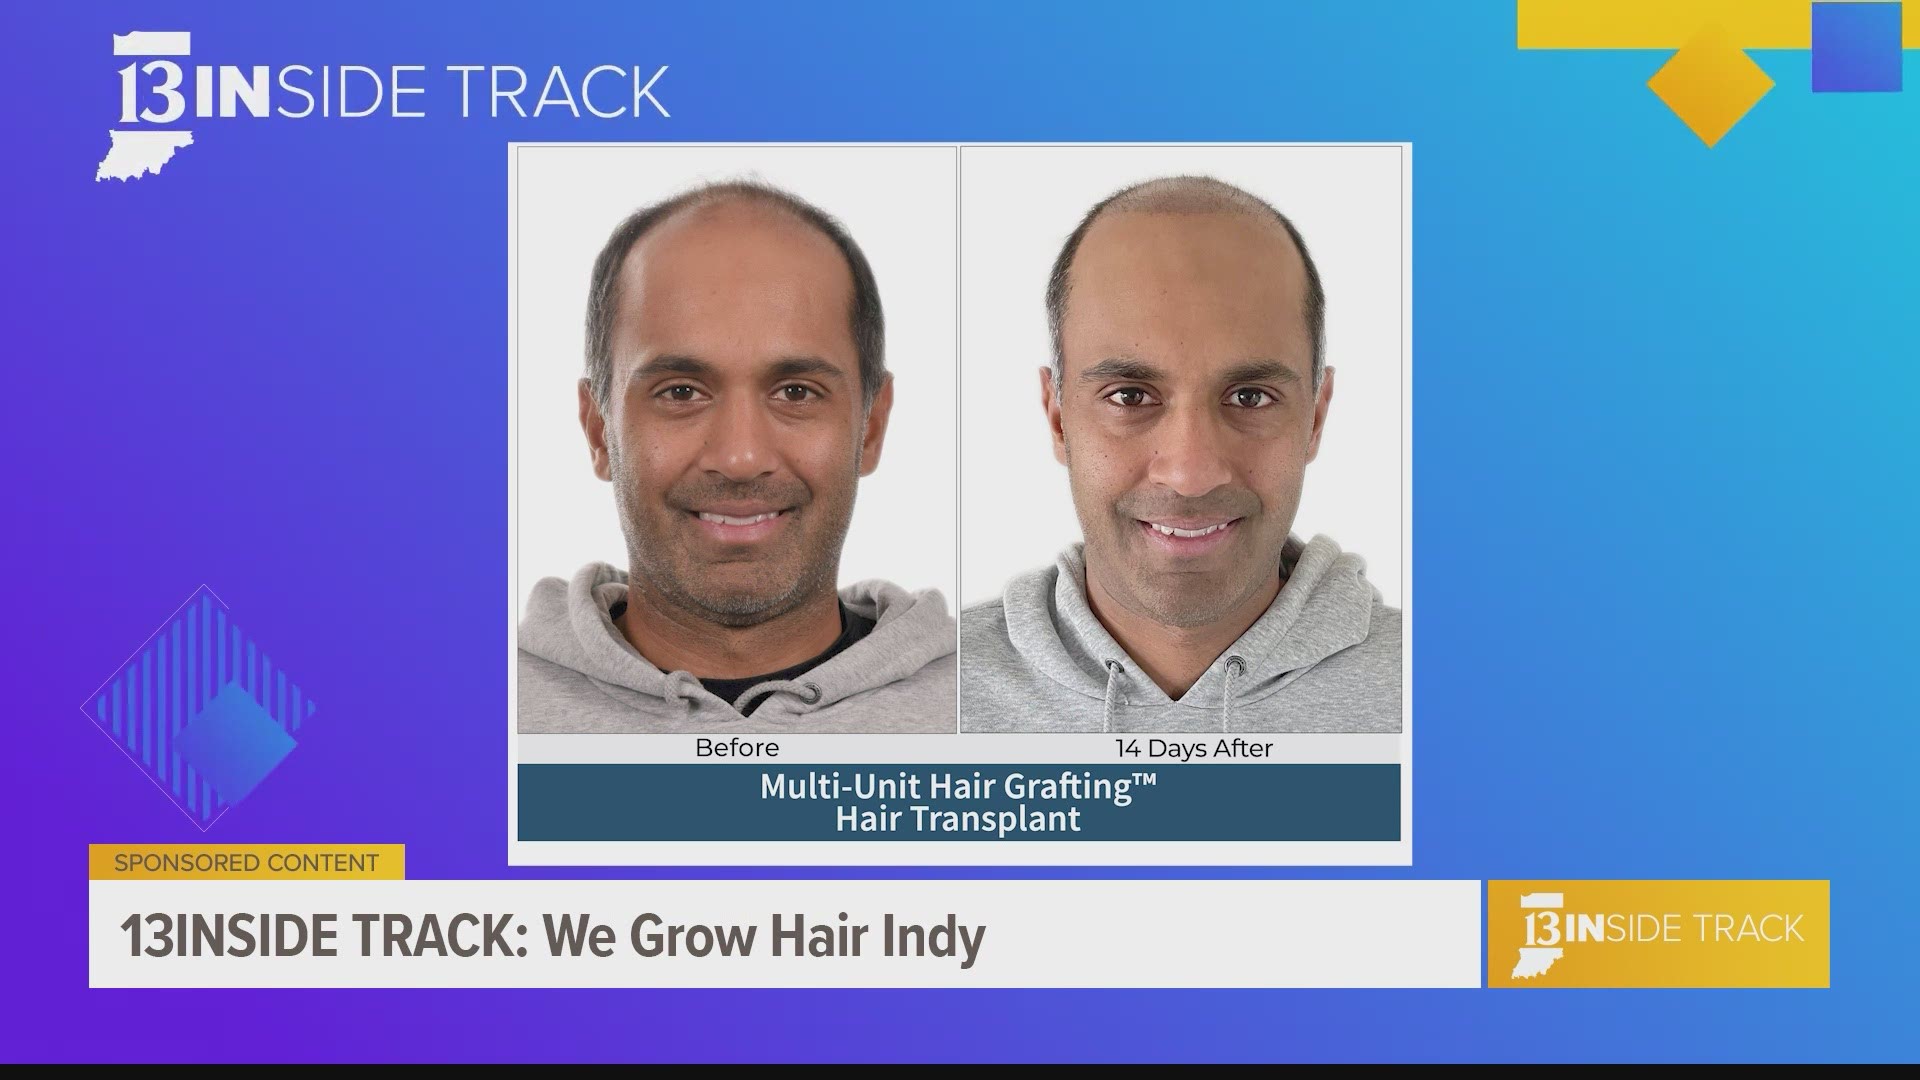 Clients to We Grow Hair Indy receive a customized plan because no hair loss case is the same.